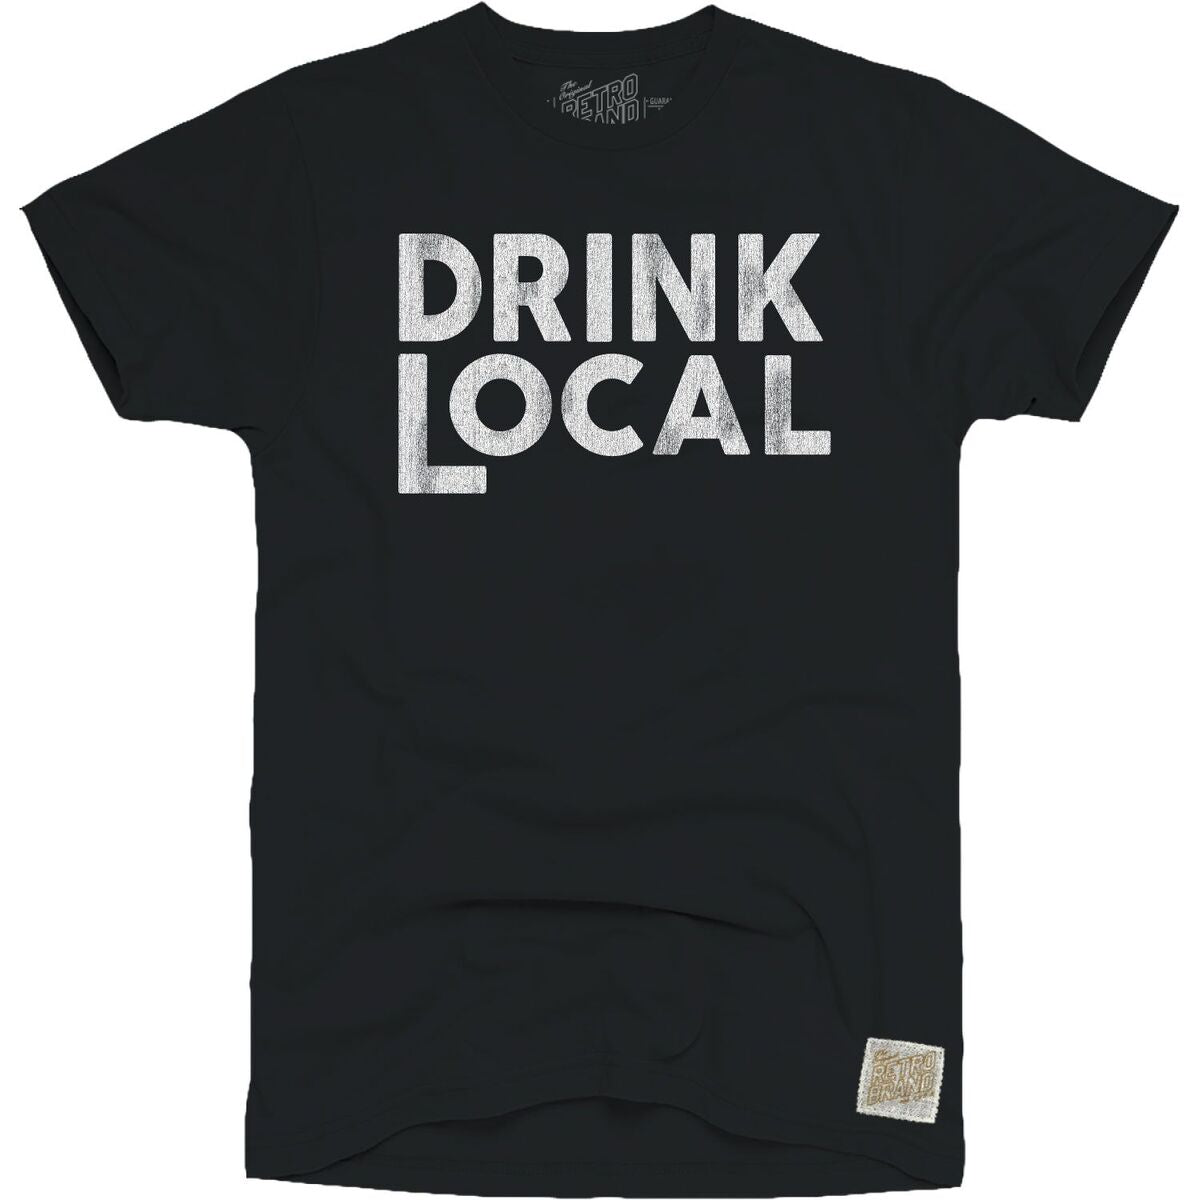 Drink Local in faded white print on our 100% cotton unisex tee in black